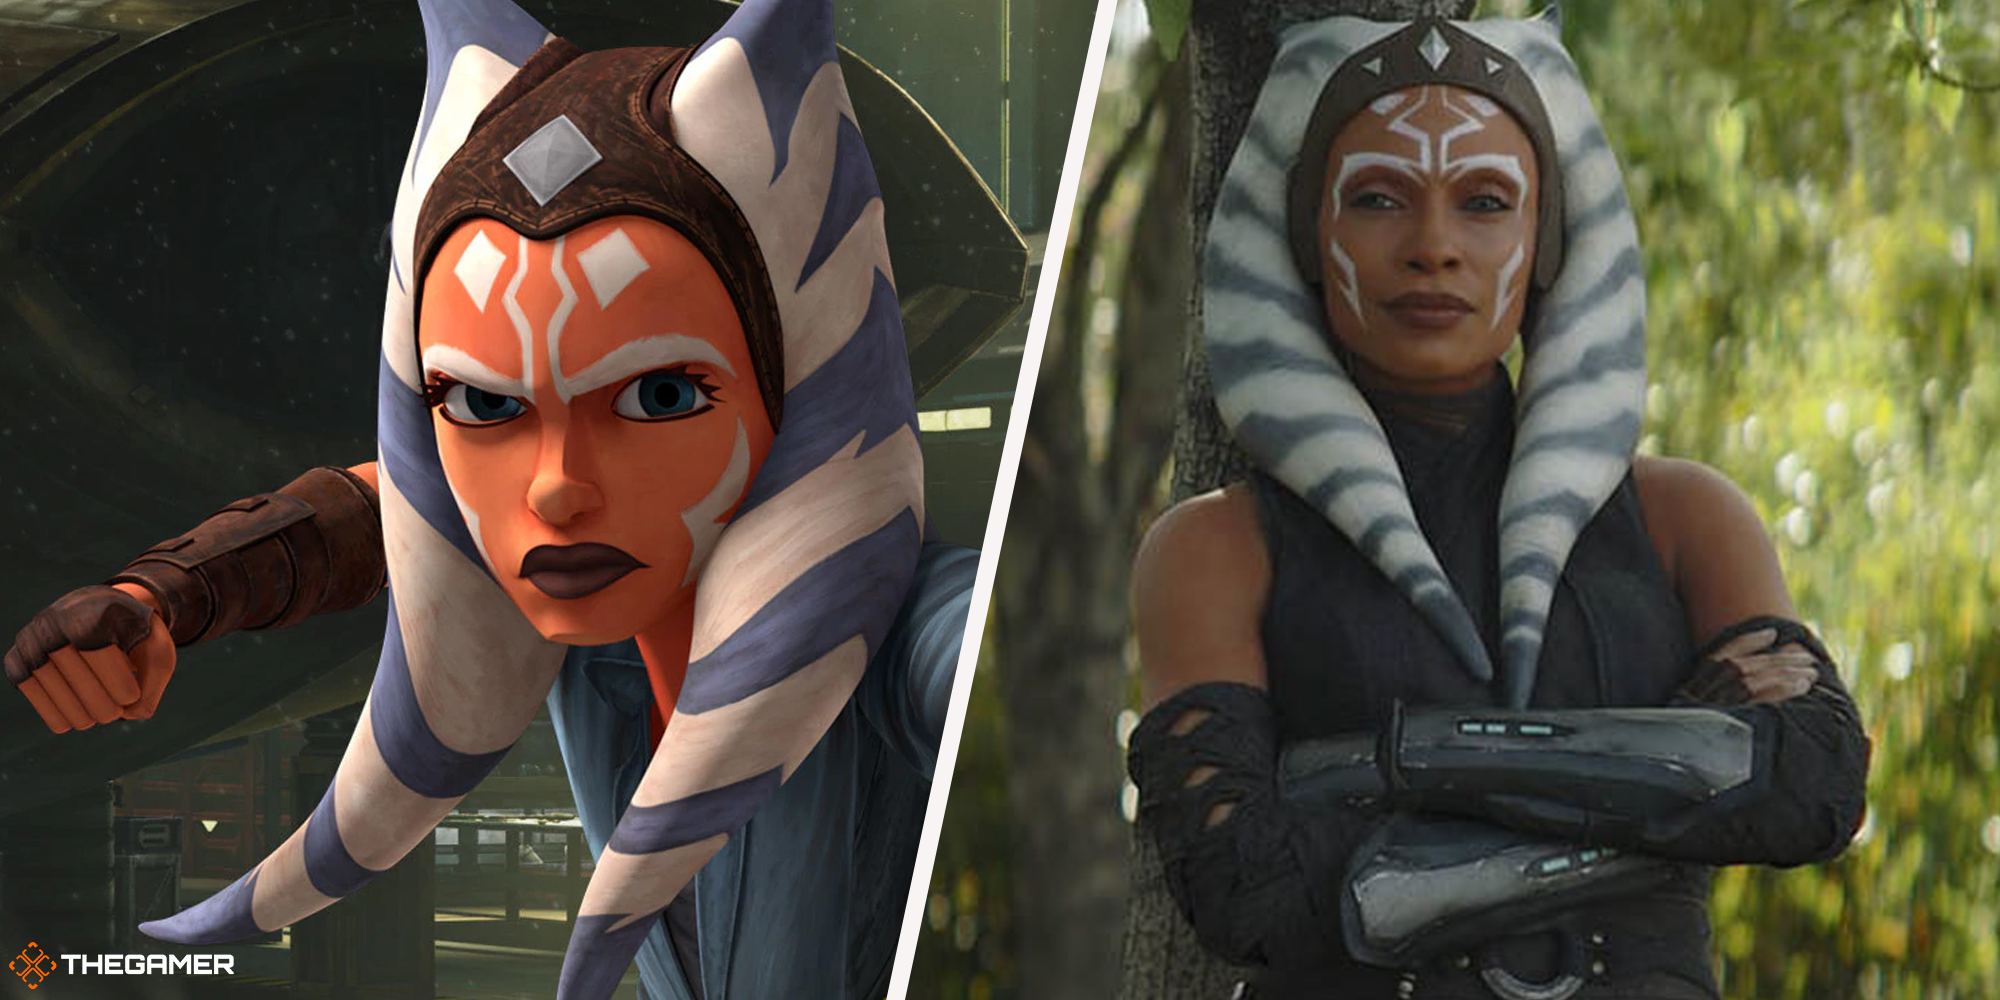 Star Wars - Ahsoka Tano animated (left) and played by Rosario Dawson (right) 2